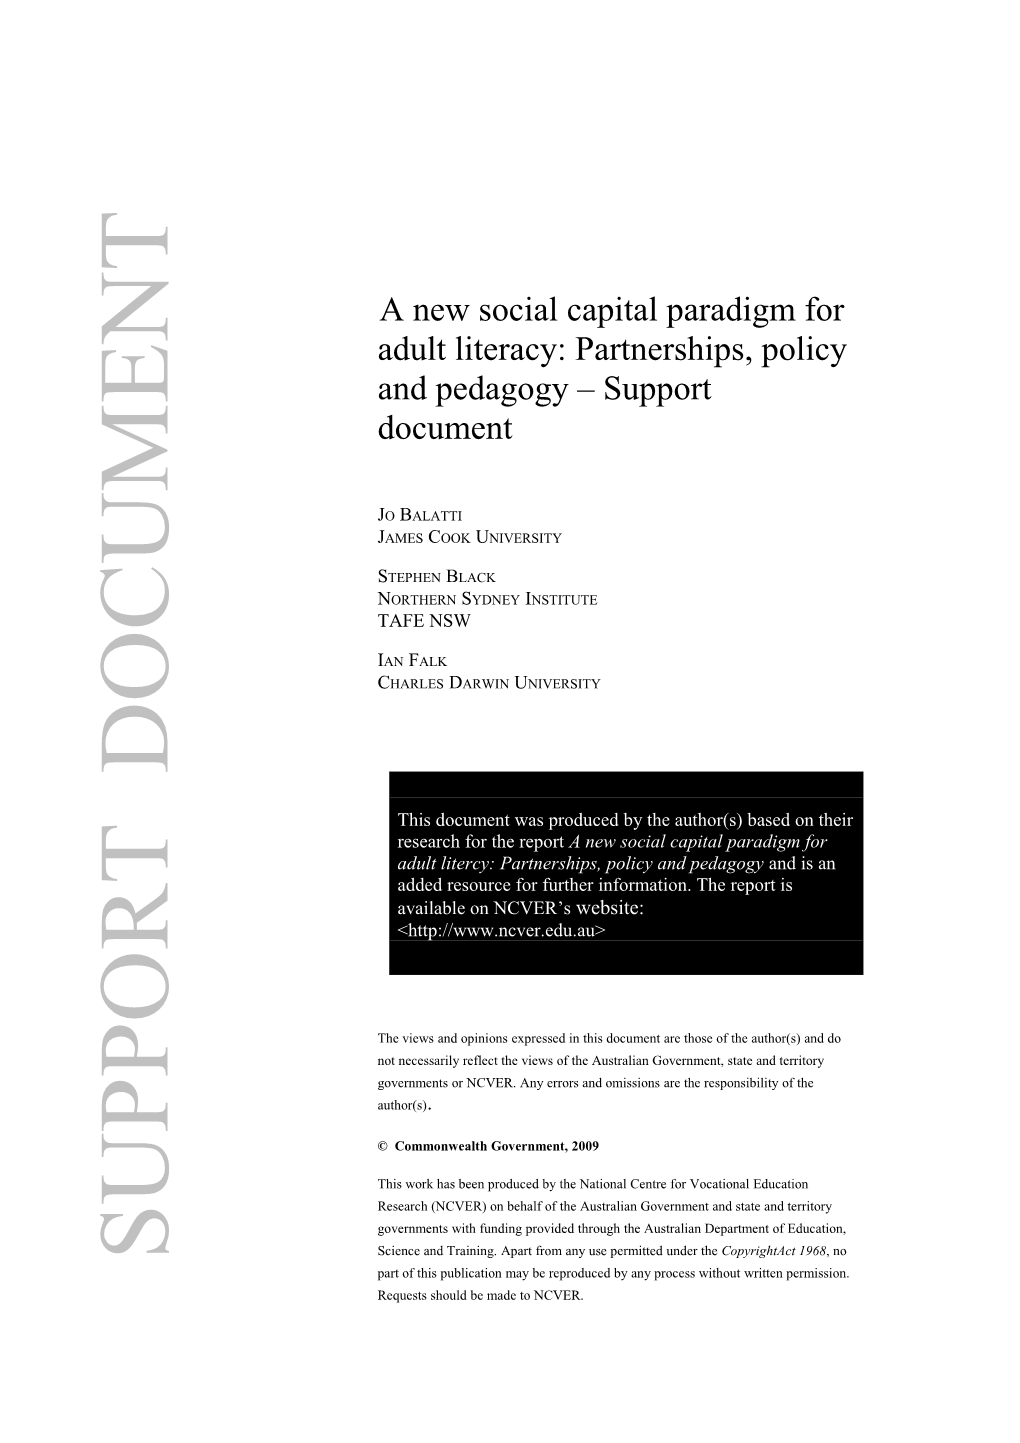 A New Social Capital Paradigm for Adult Literacy: Partnerships, Policy and Pedagogy Support